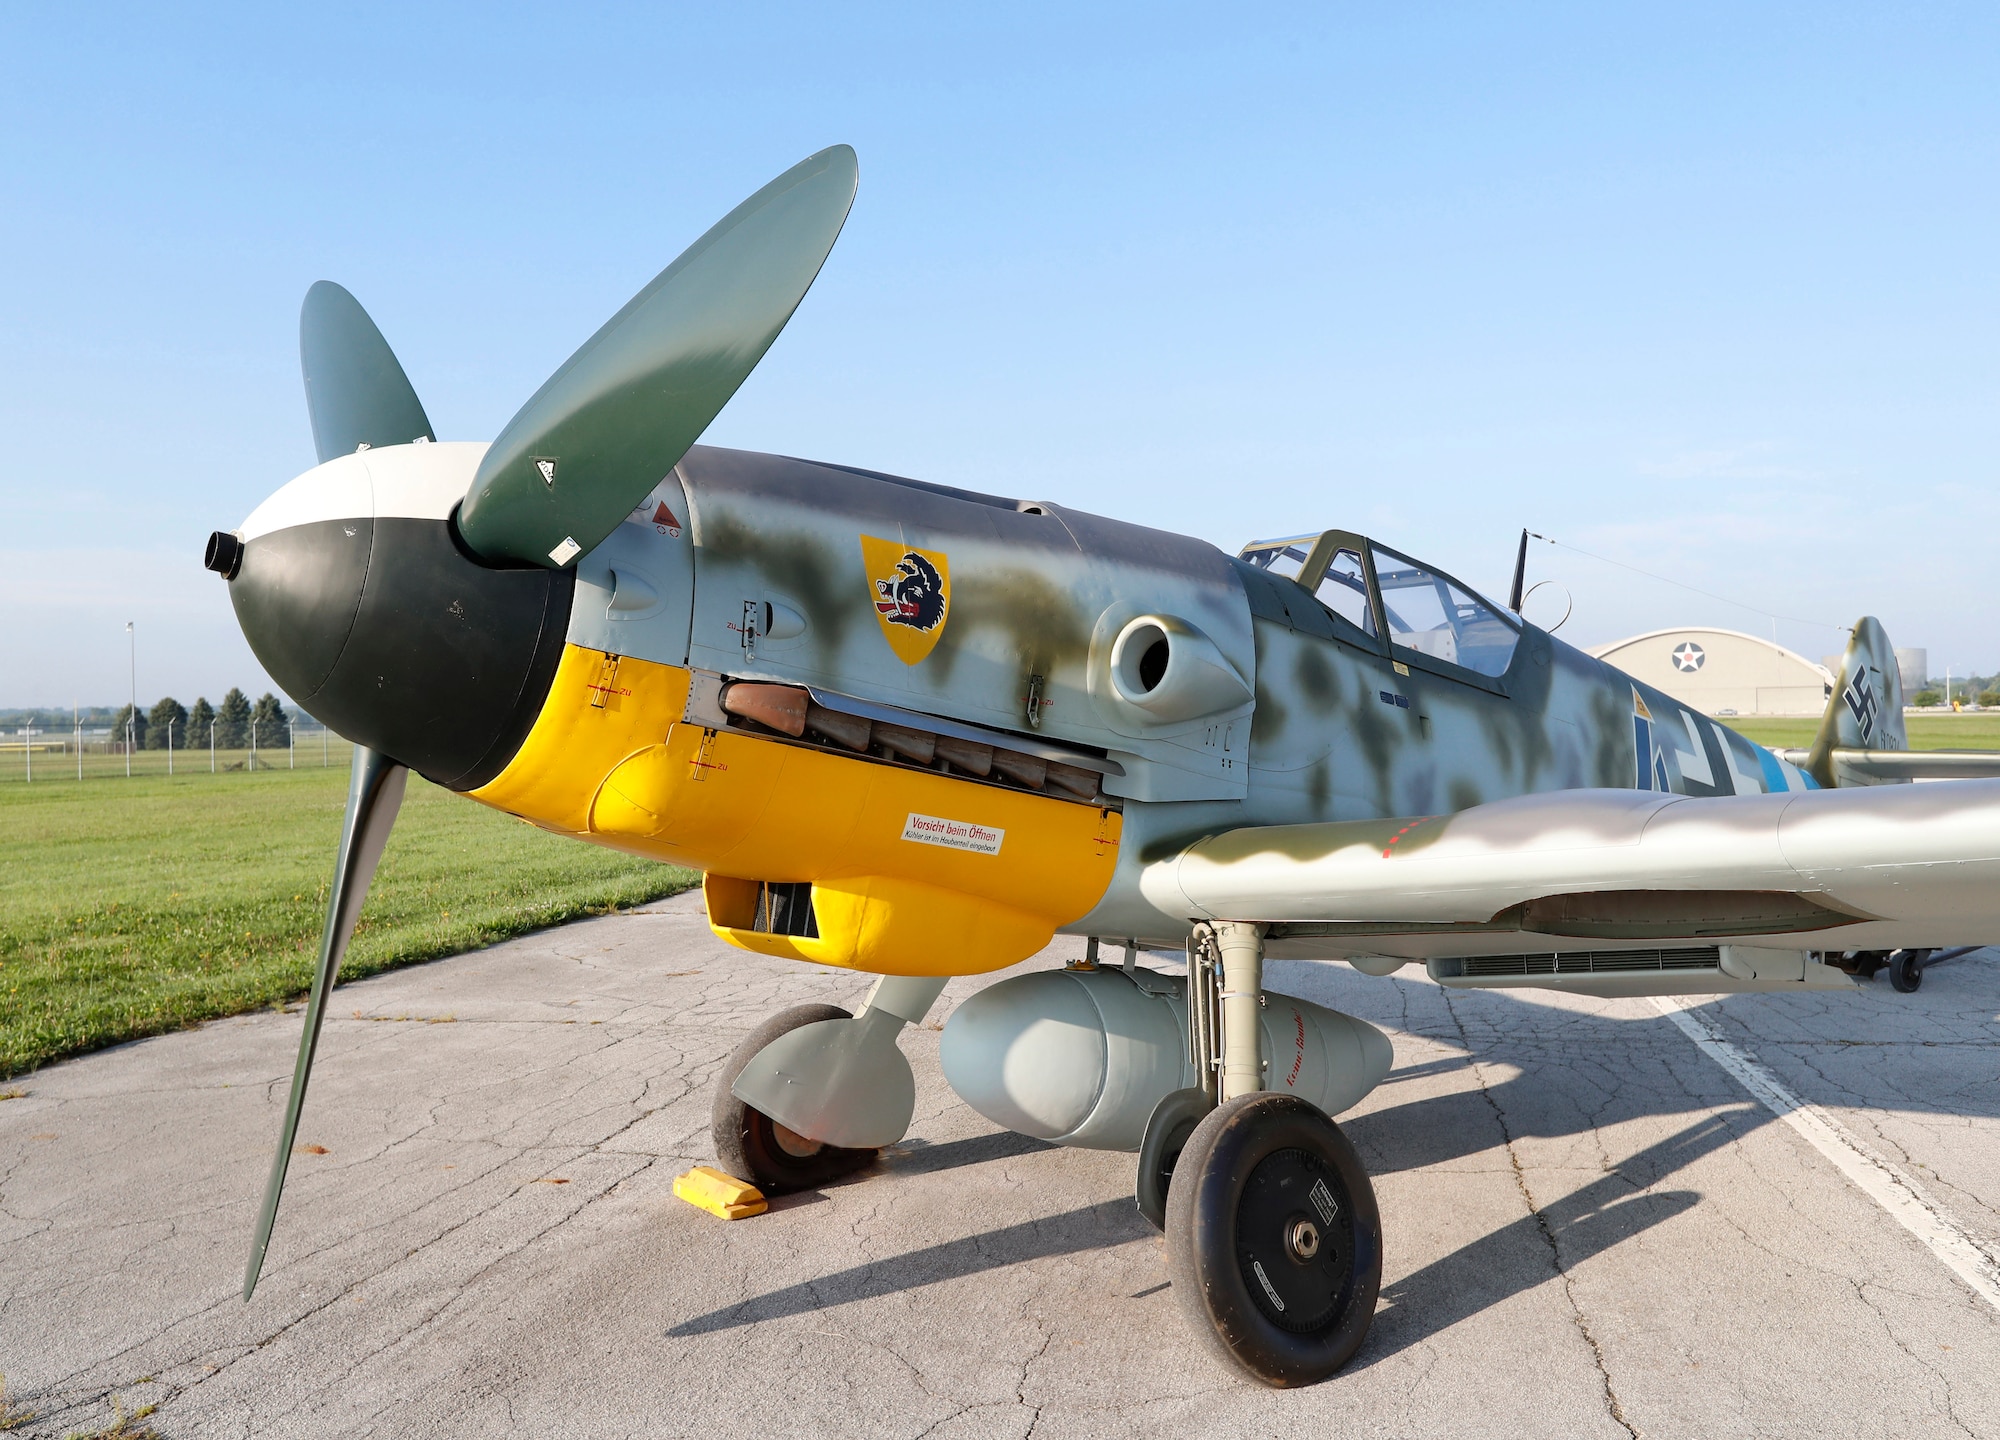 Messerschmitt Bf 109G-10 at the National Museum of the United States Air Force. The museum's Bf 109G-10 is painted to represent an aircraft from Jagdgeschwader 300, a unit that defended Germany against Allied bombers during WWII. (Courtesy photo by Don Popp)